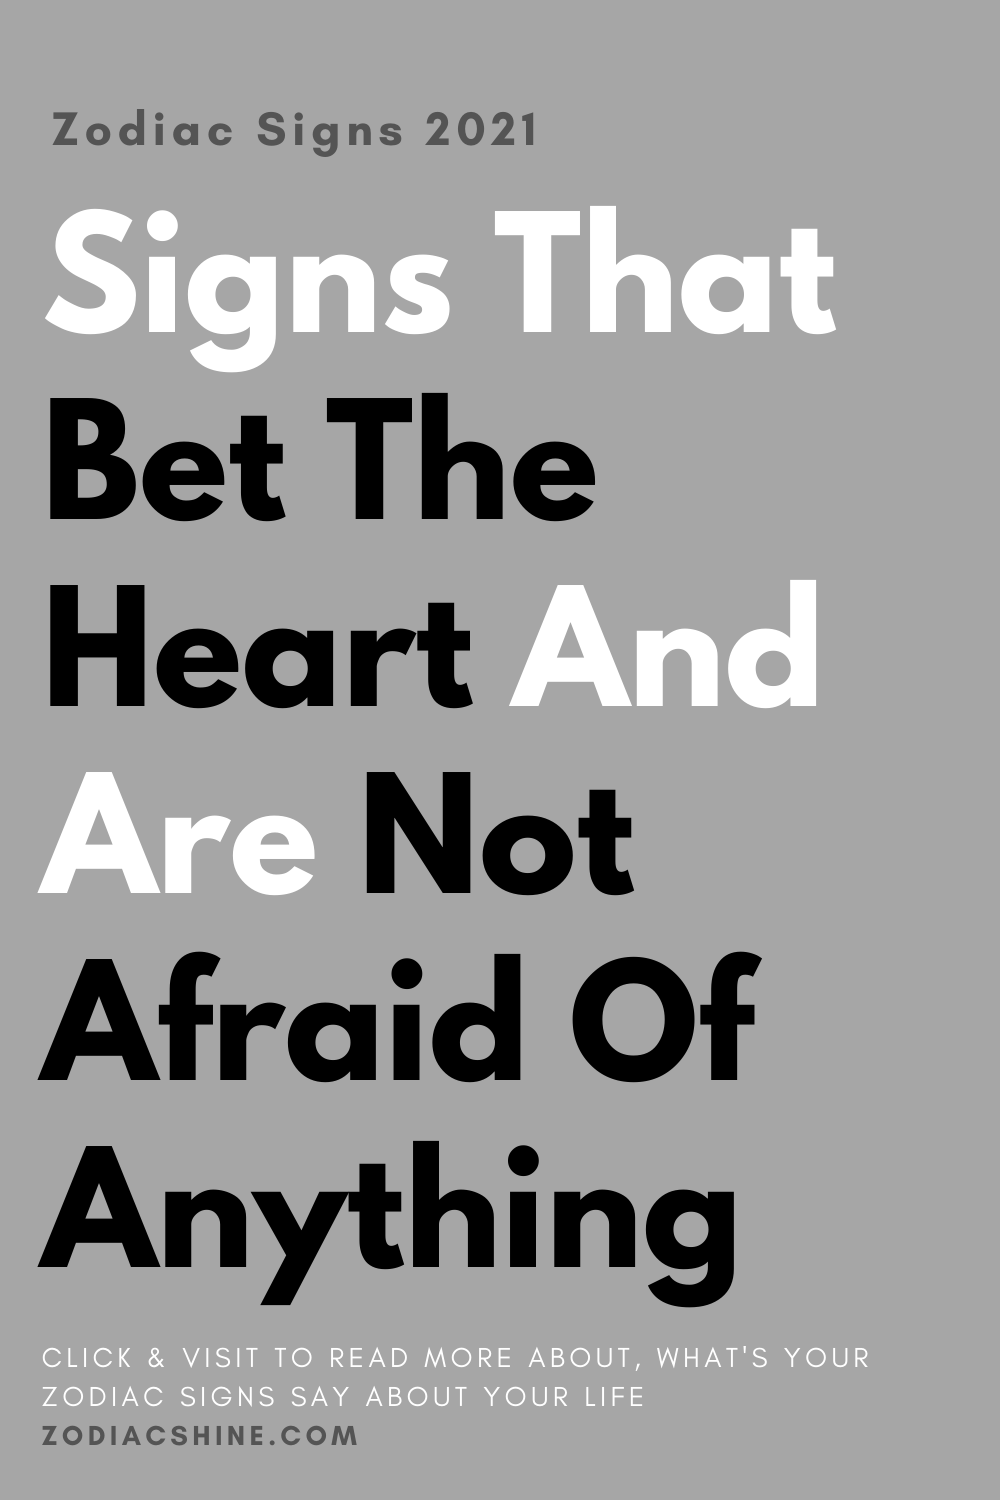 Signs That Bet The Heart And Are Not Afraid Of Anything